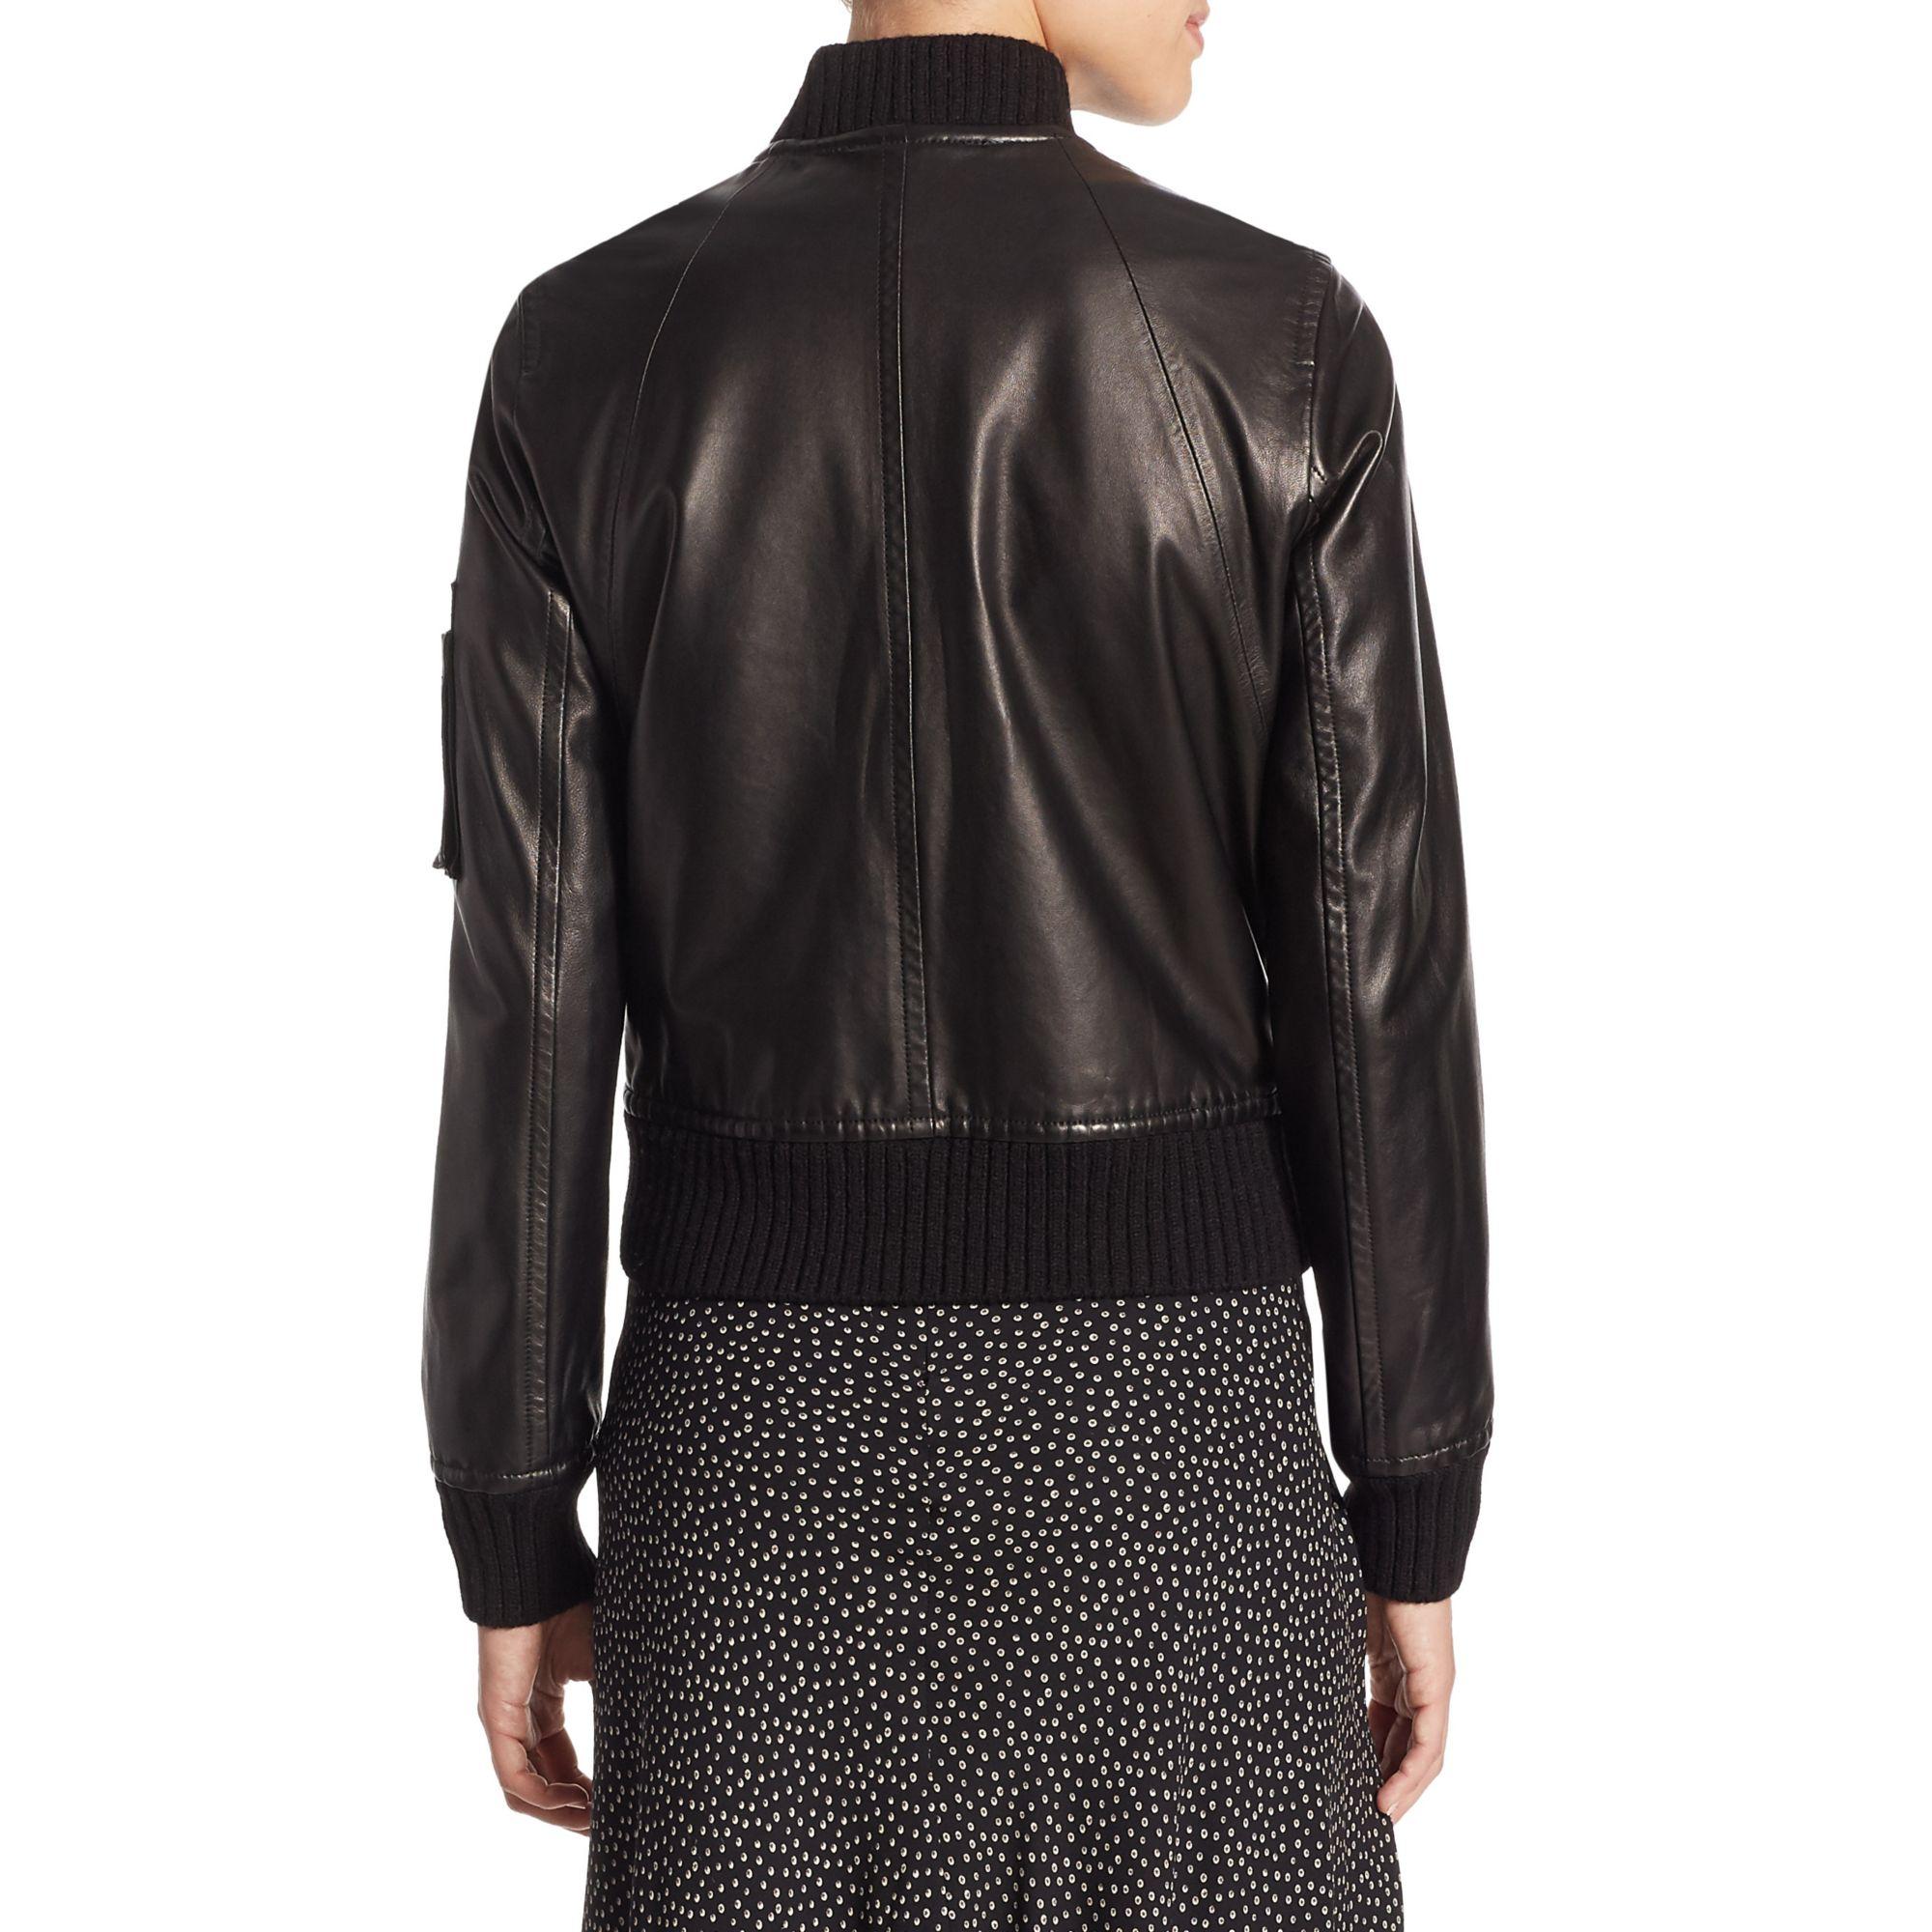 Vince Oversized Leather Bomber Jacket in Canyon